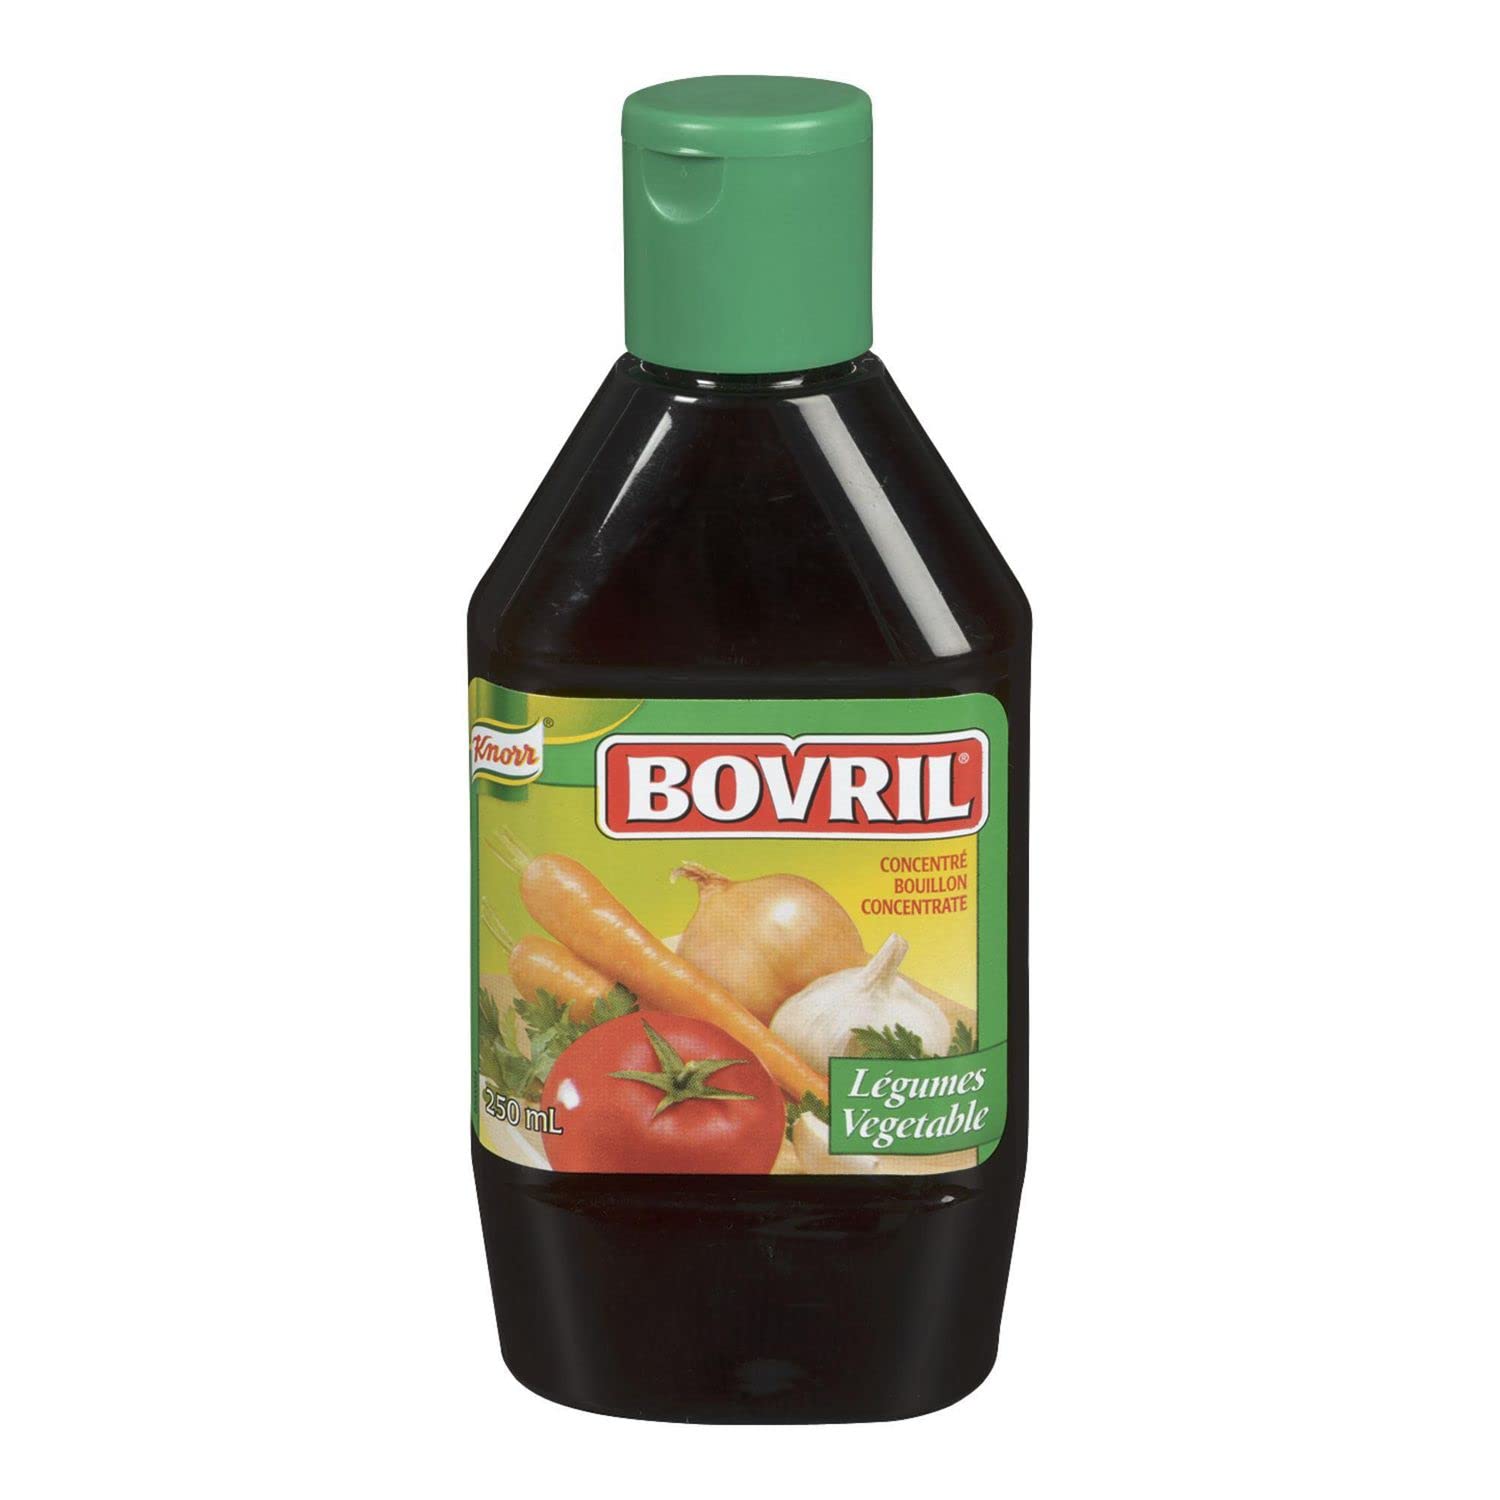 Knorr Bovril Vegetable Concentrated Liquid Stock